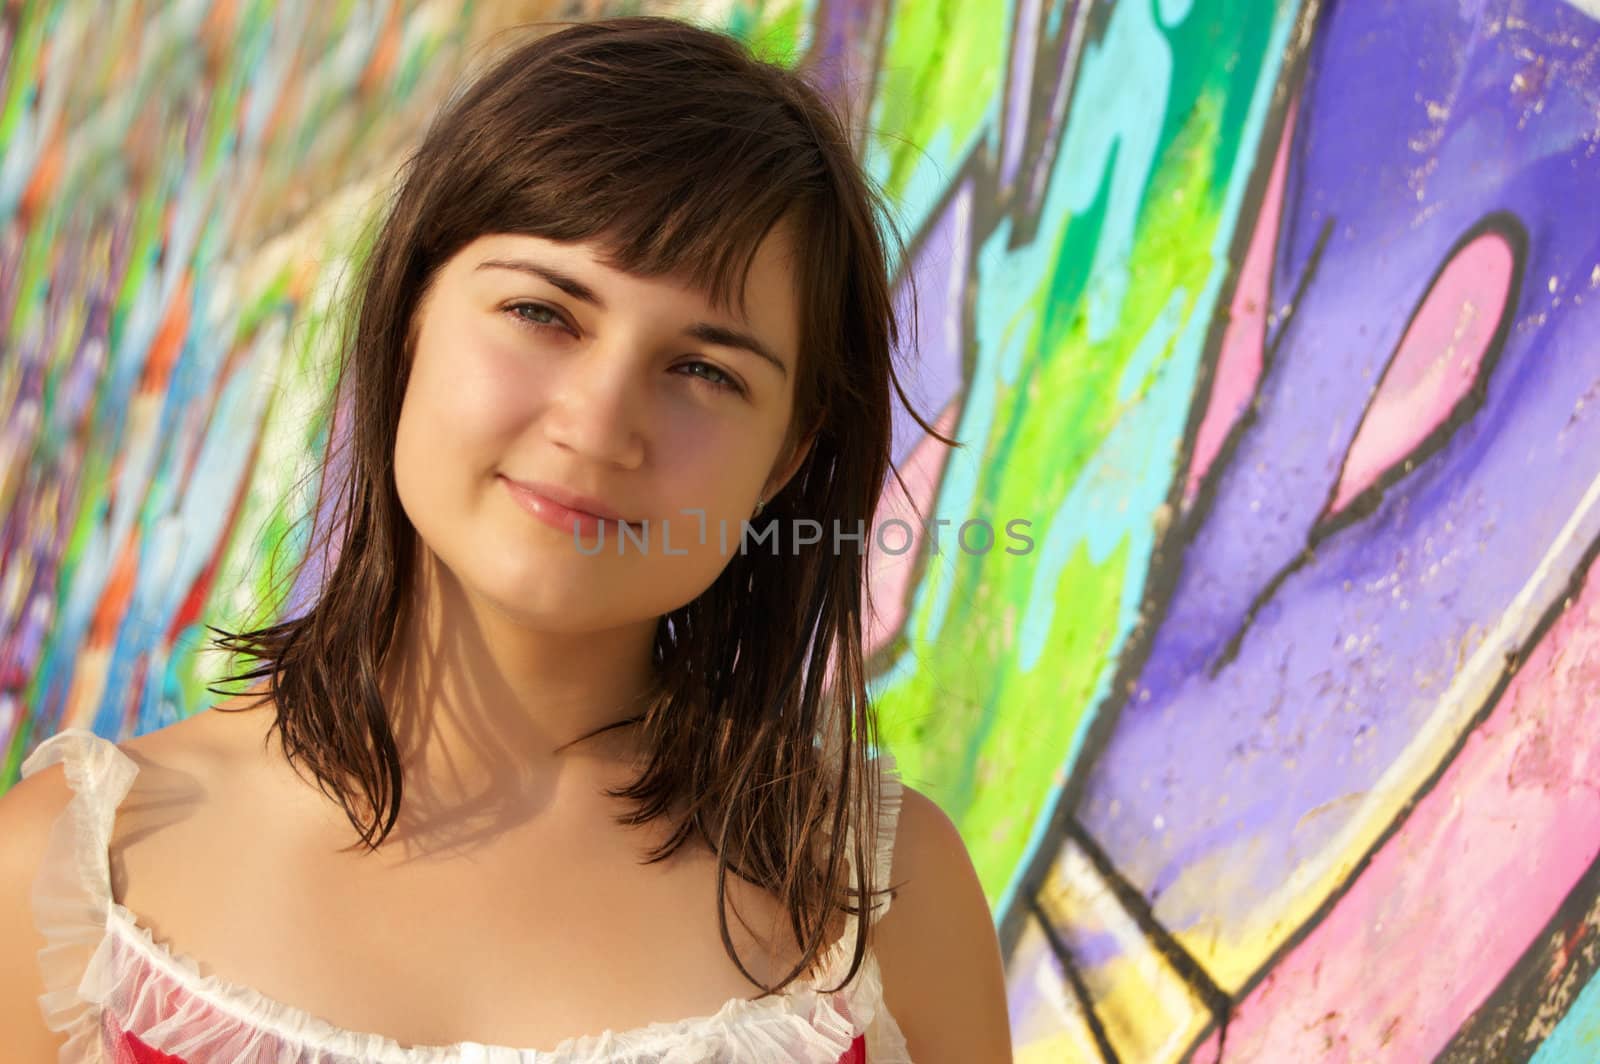 Women's  portrait on a colored wall background